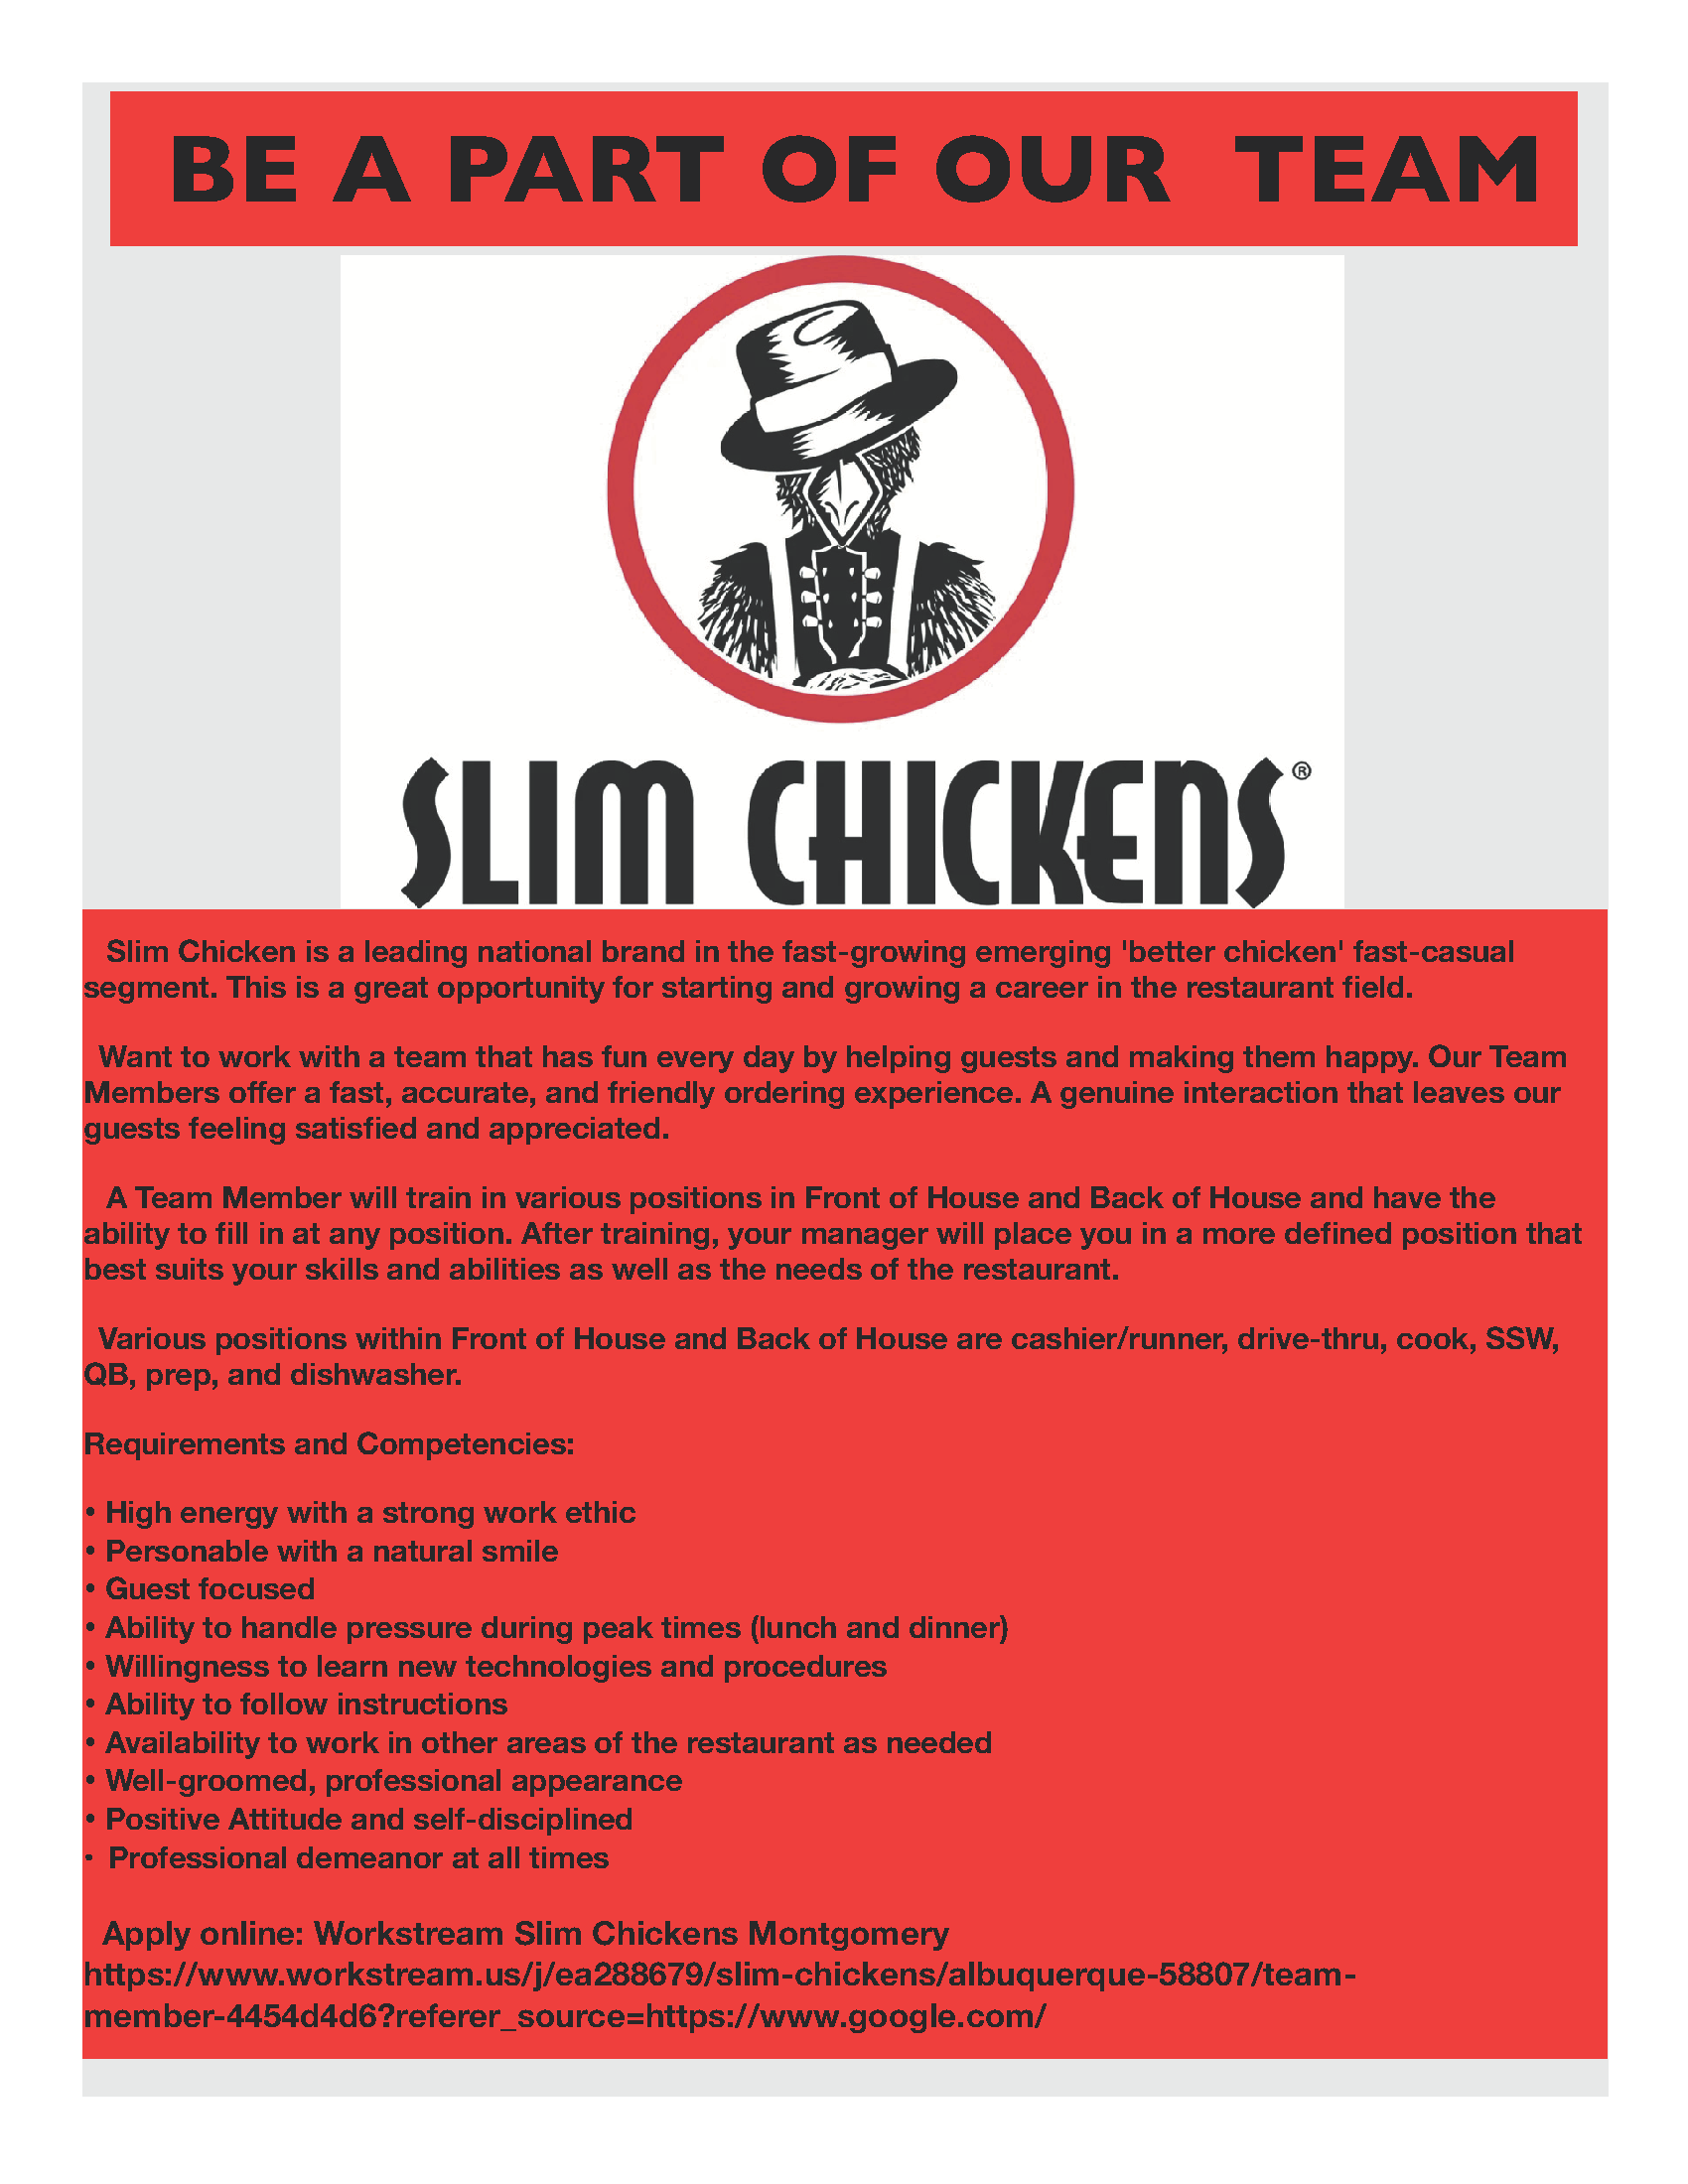 About Us - Slim Chickens